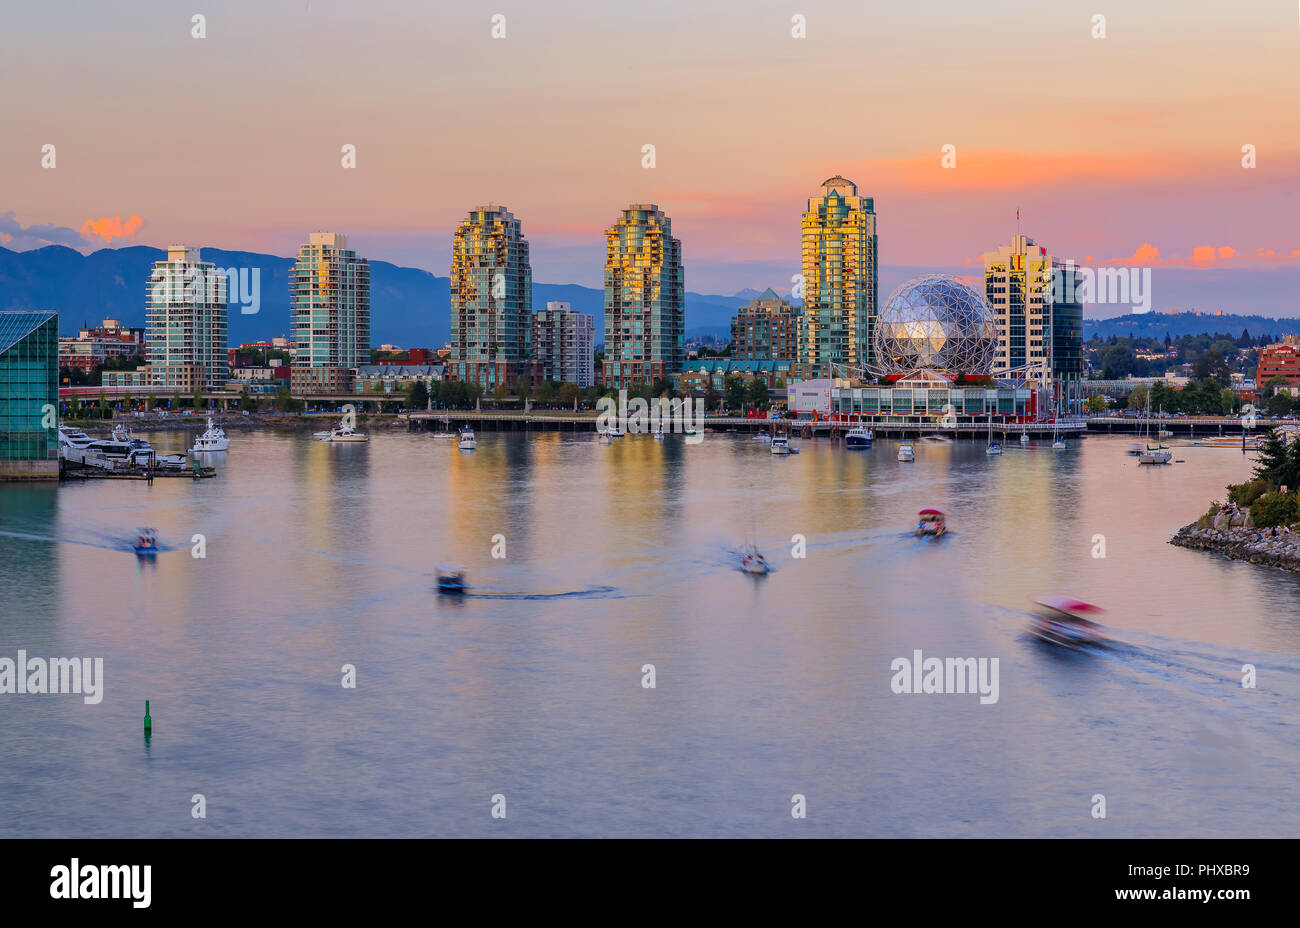 Vancouver skyline over False Creek at sunset with condominium towers and the geodesic dome of Science World, British Columbia, Canada Stock Photo